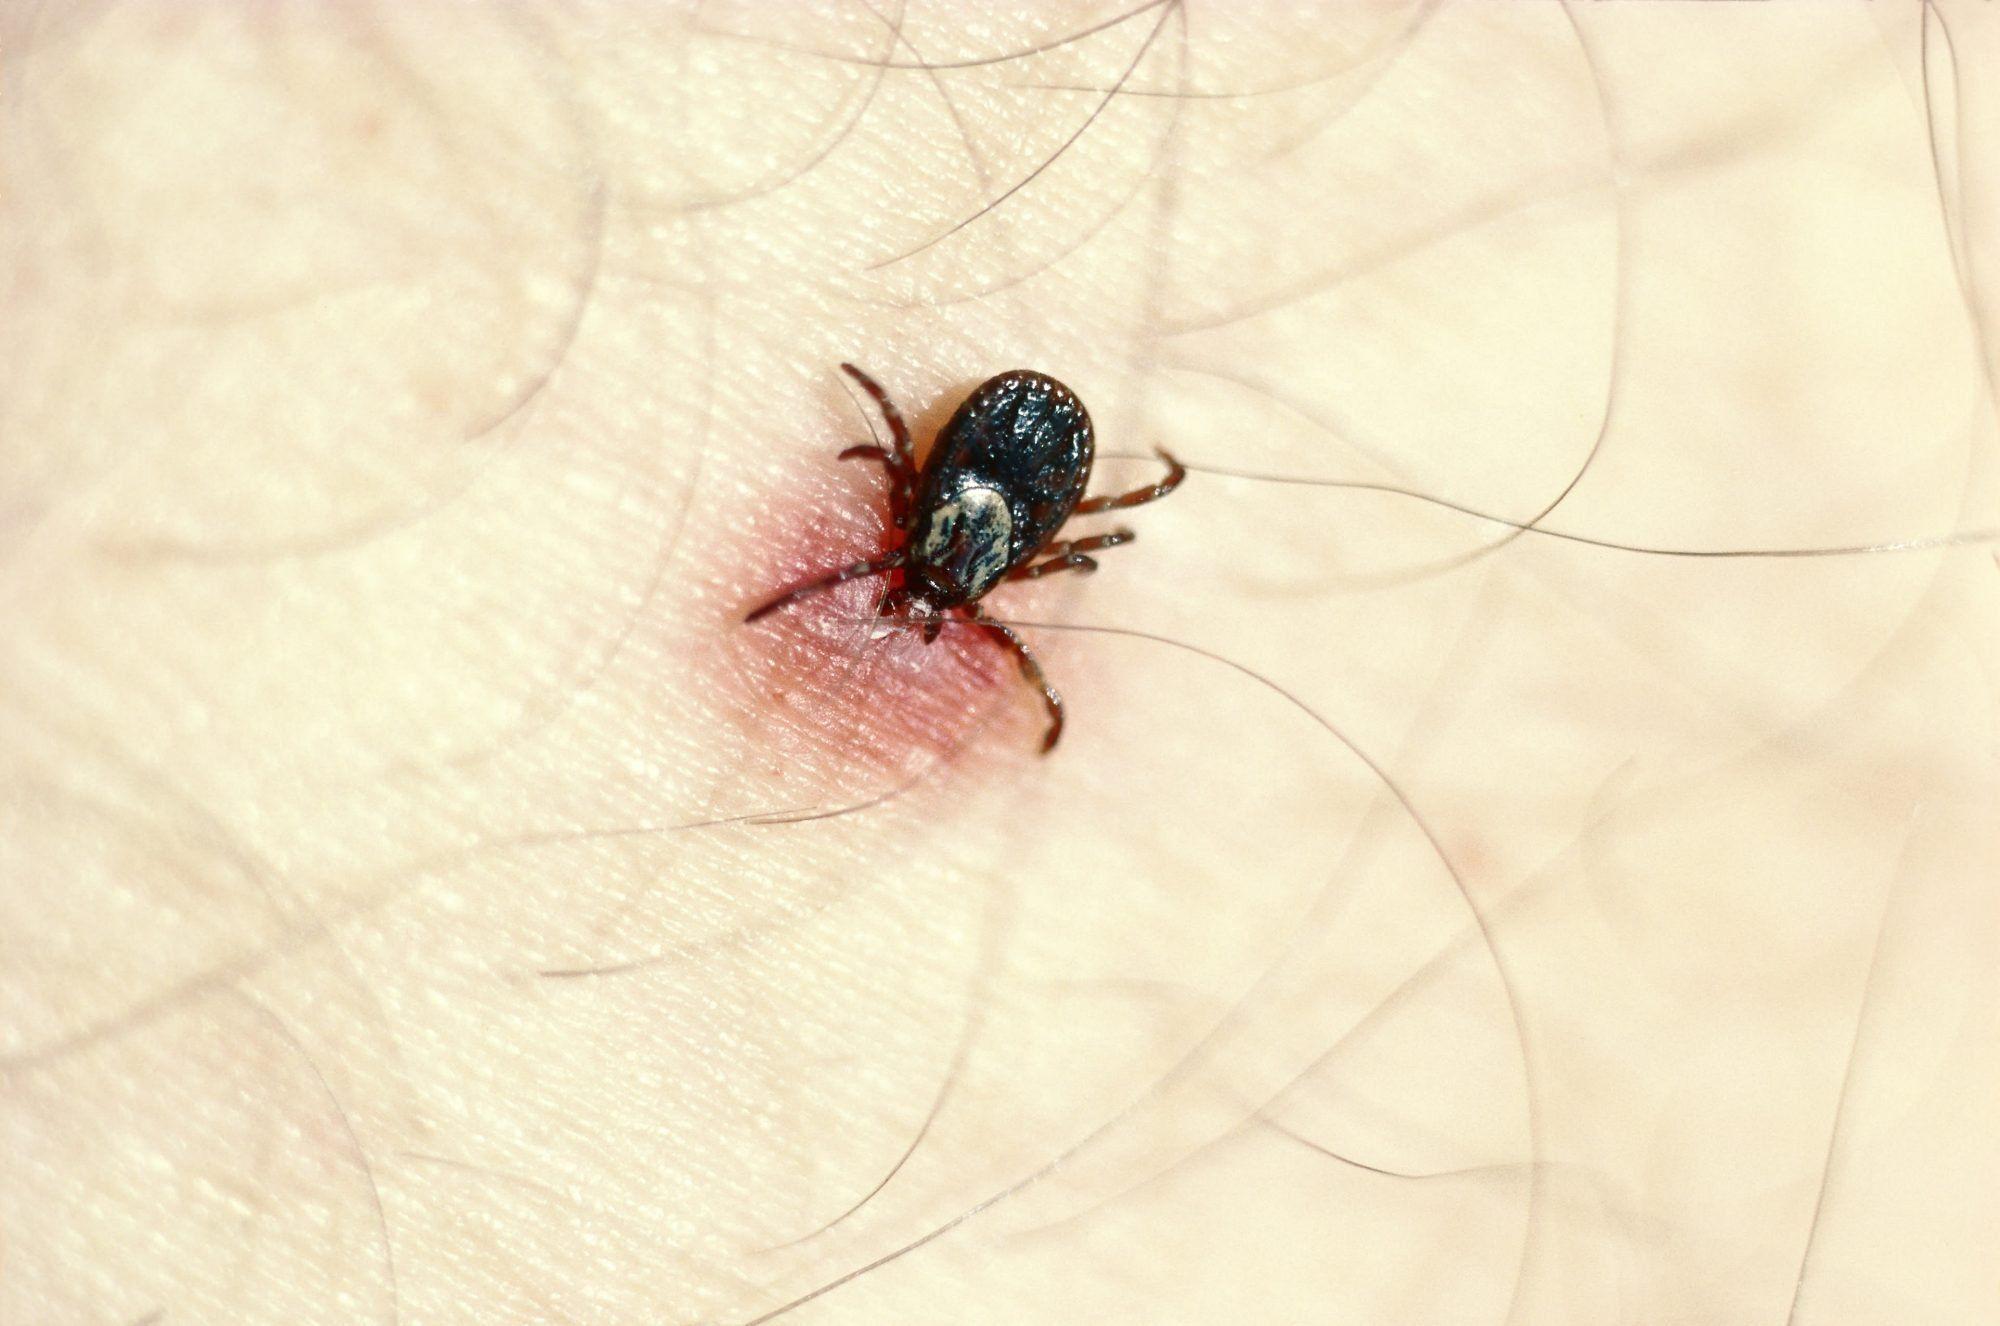 Fun facts about ticks